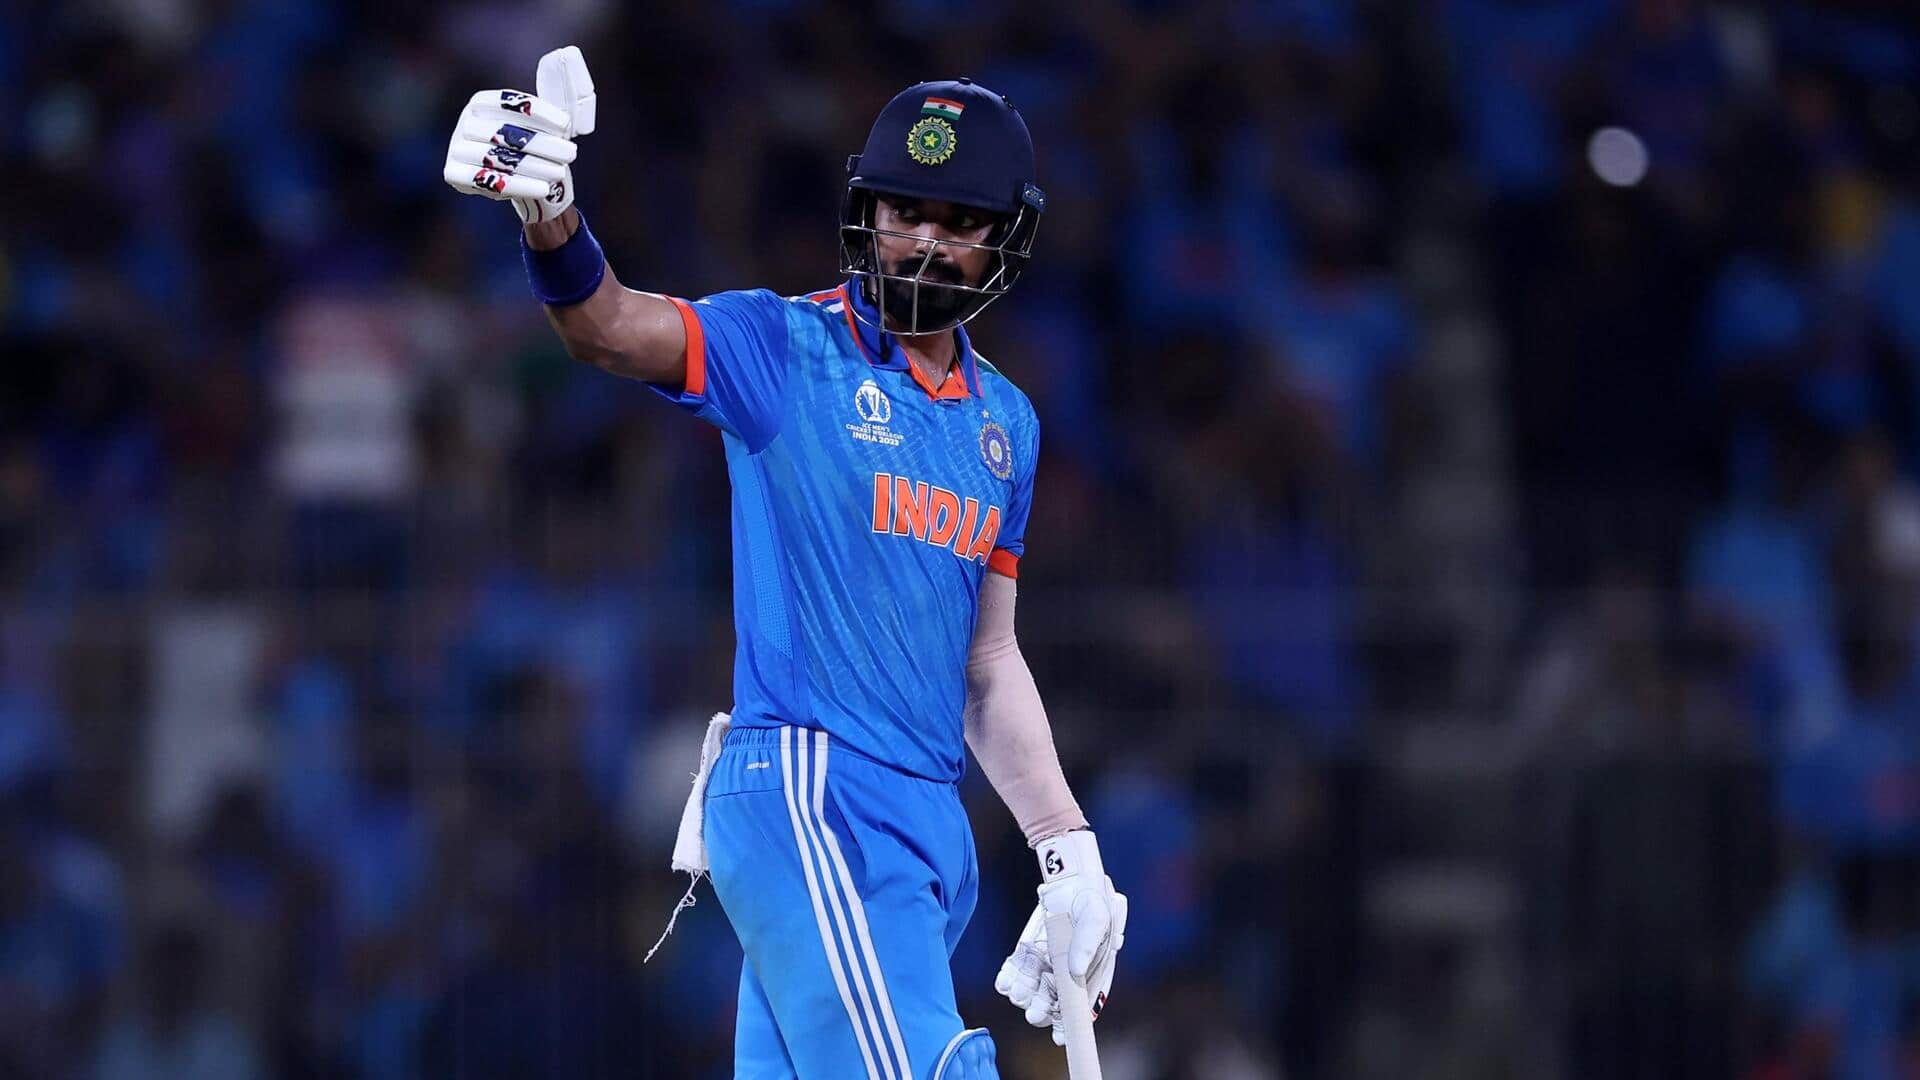 KL Rahul slams second-highest WC score by an Indian wicket-keeper